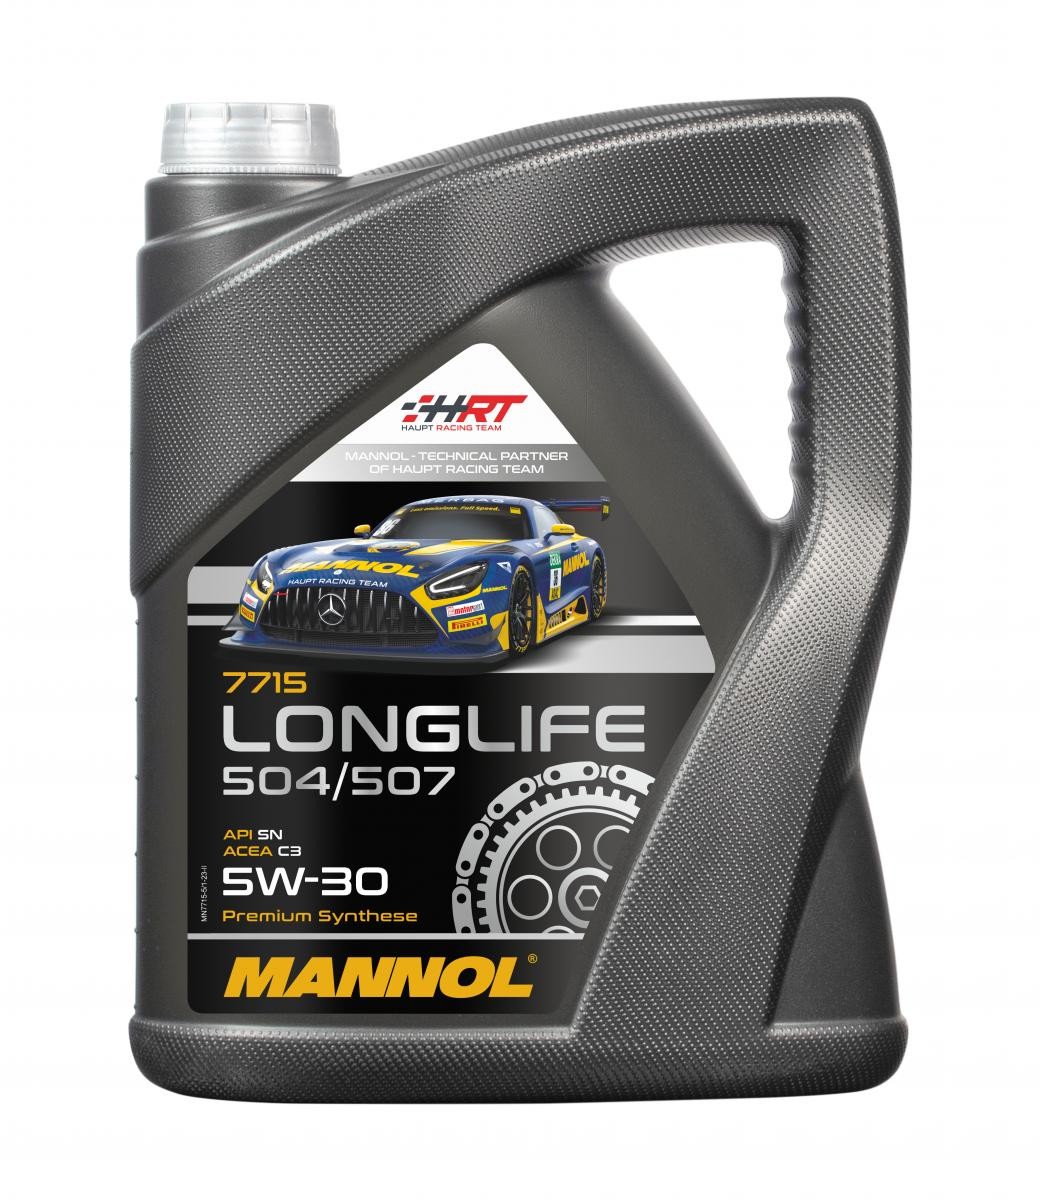 Car engine oil MN7715-5 review